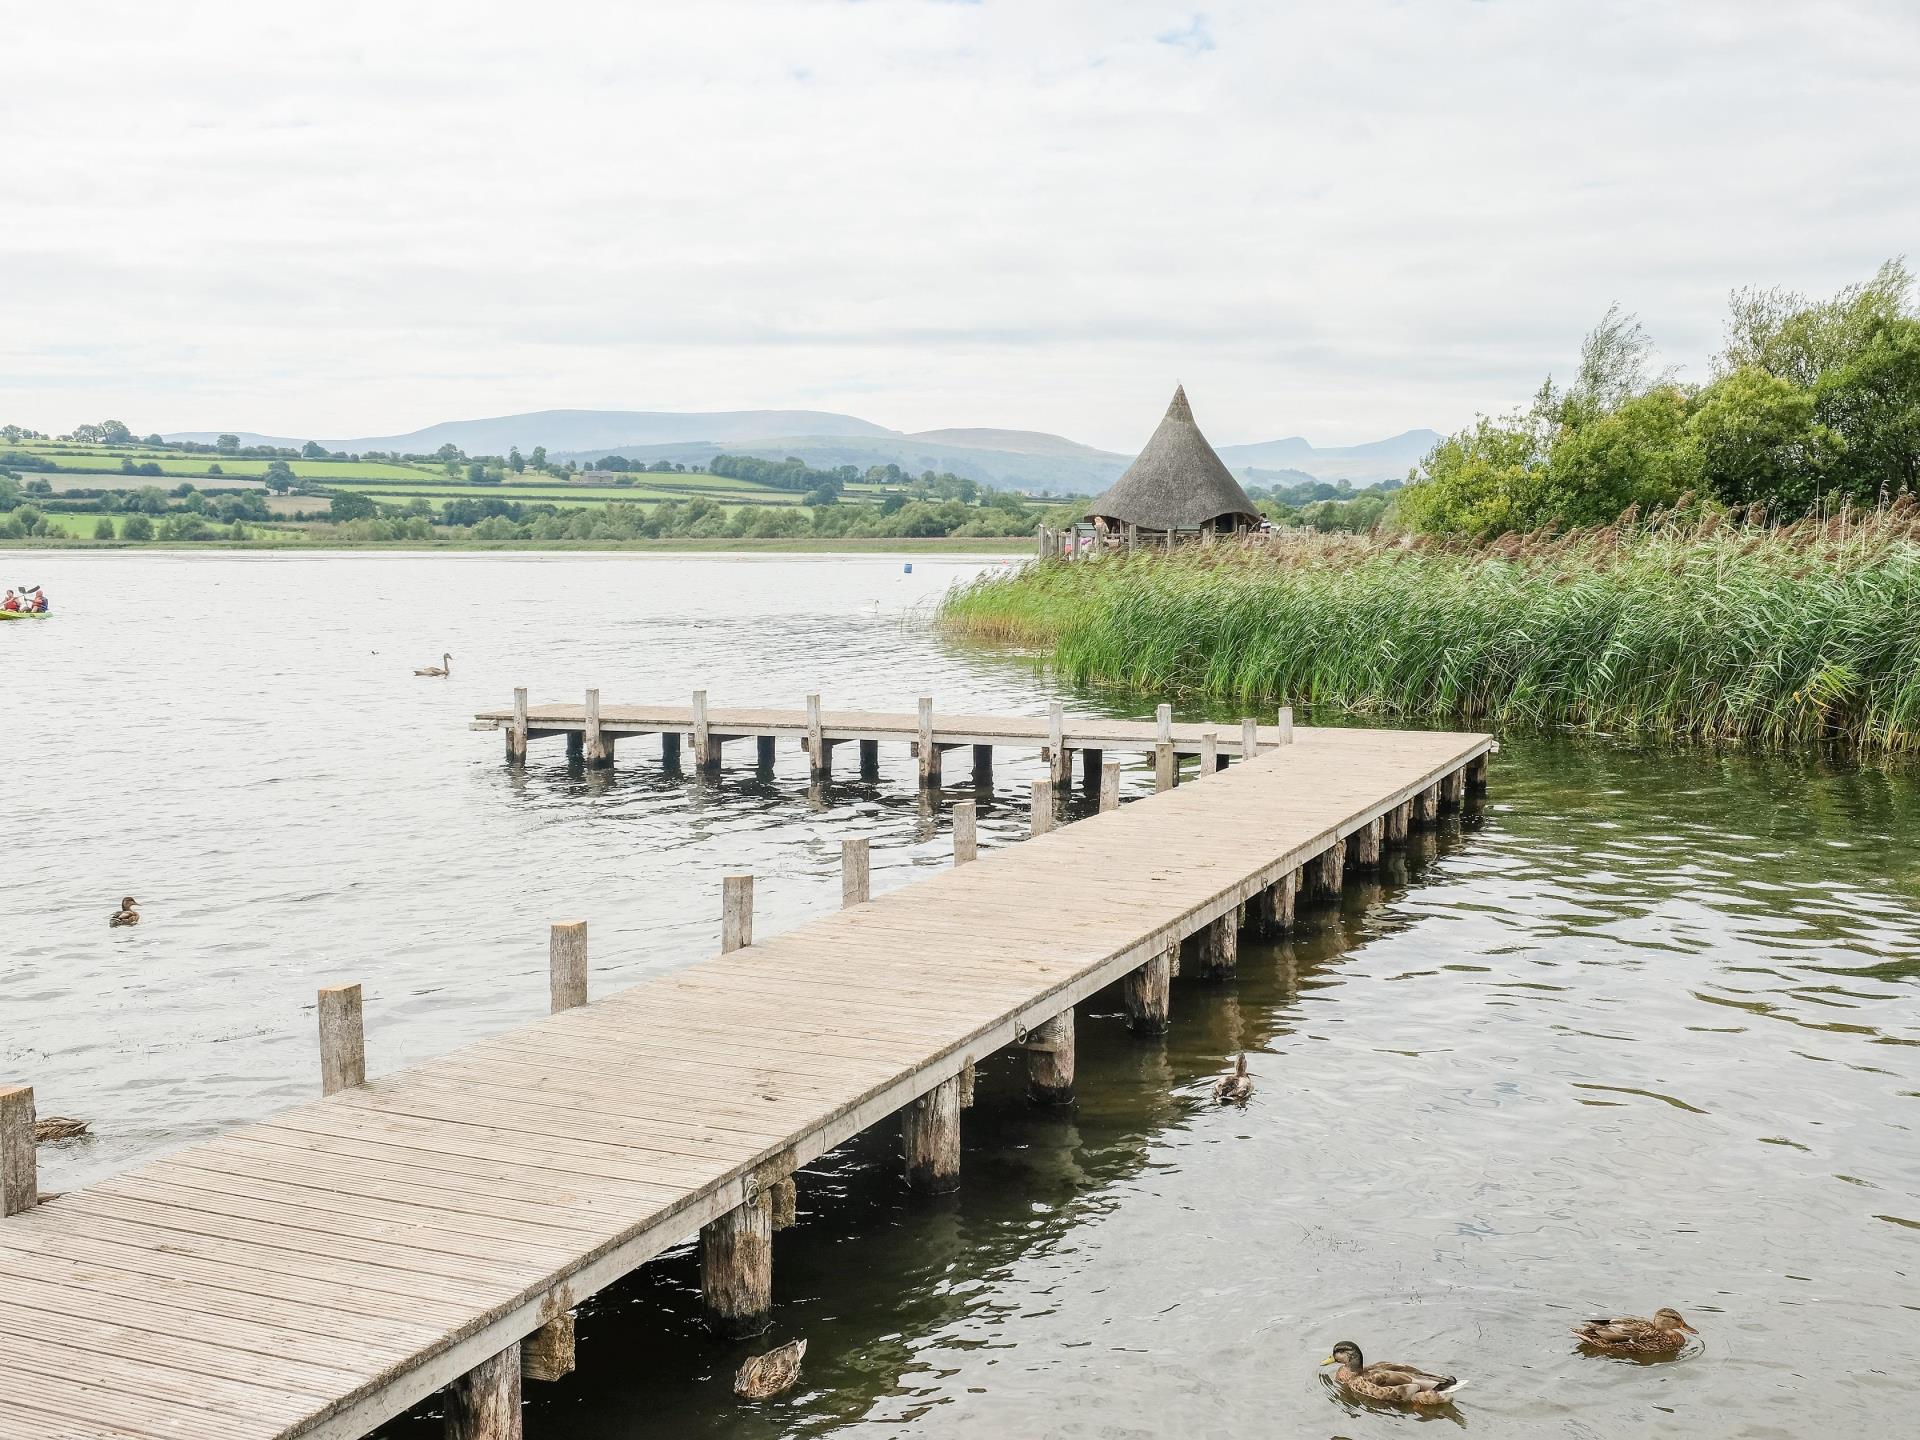 View of the Crannog Centre and the Brecon Beacons